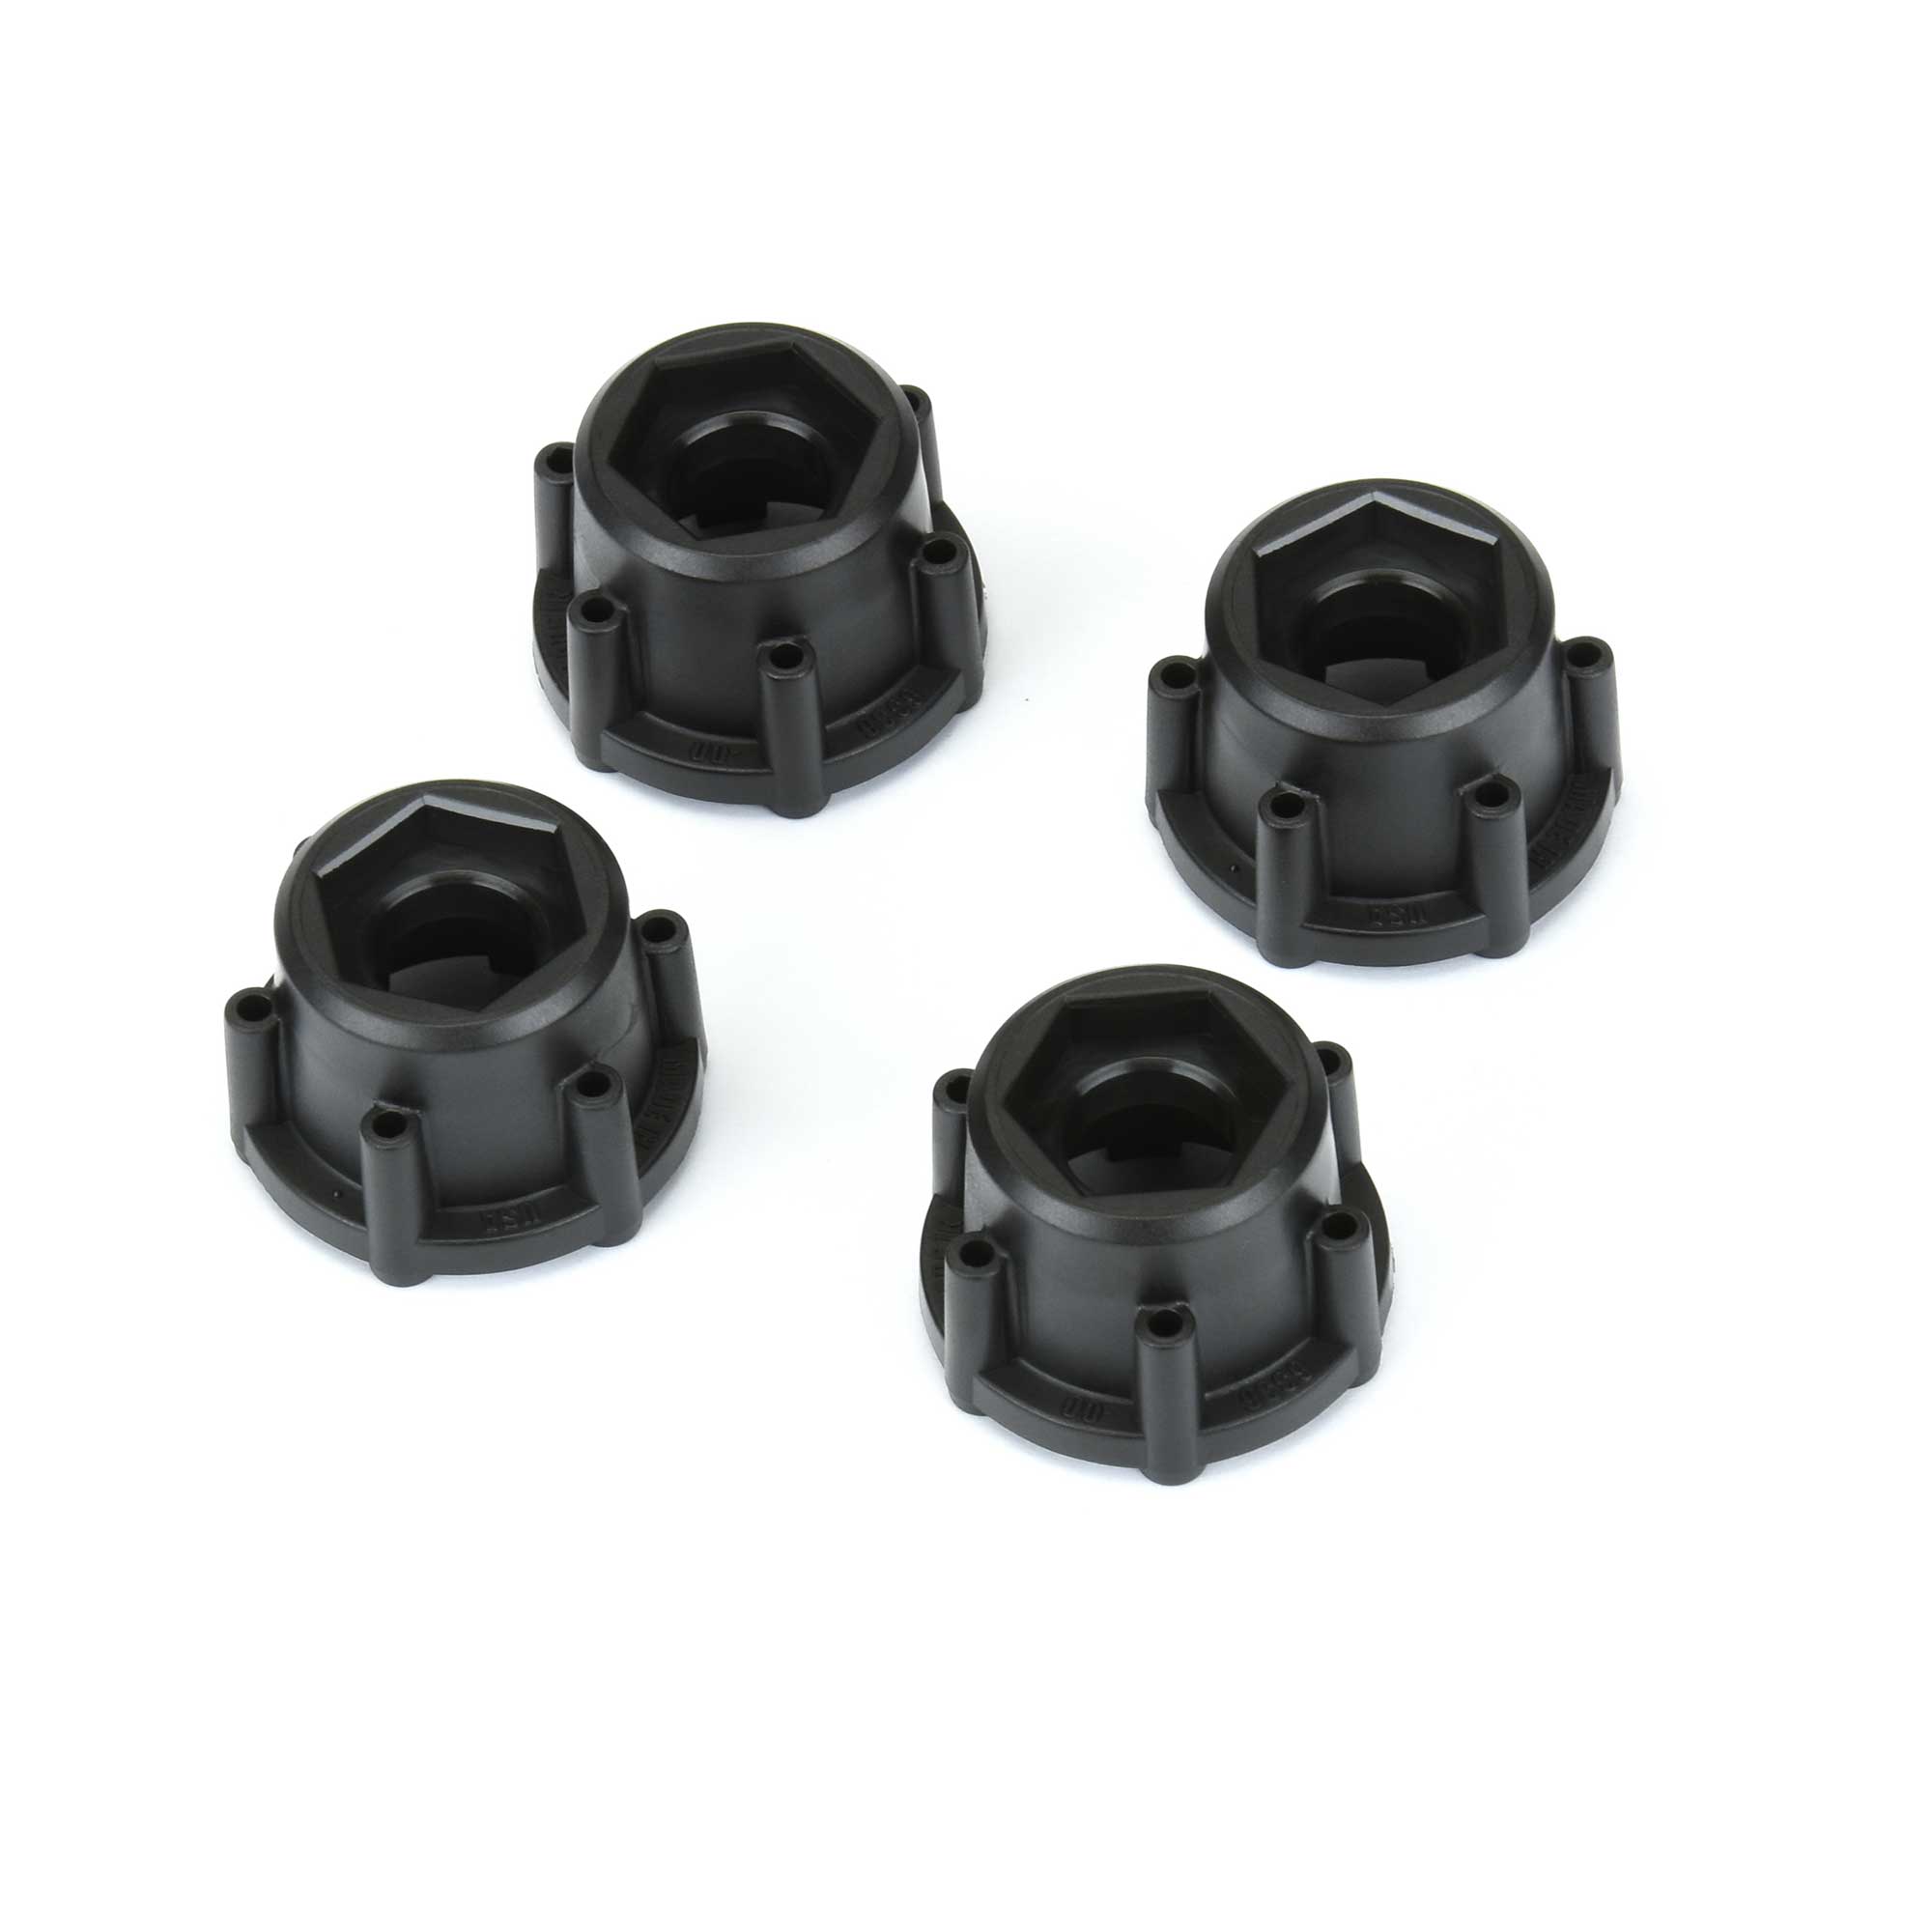 PRO6354-00 Pro-Line 6x30 to 12mm SC Hex Adapters 4